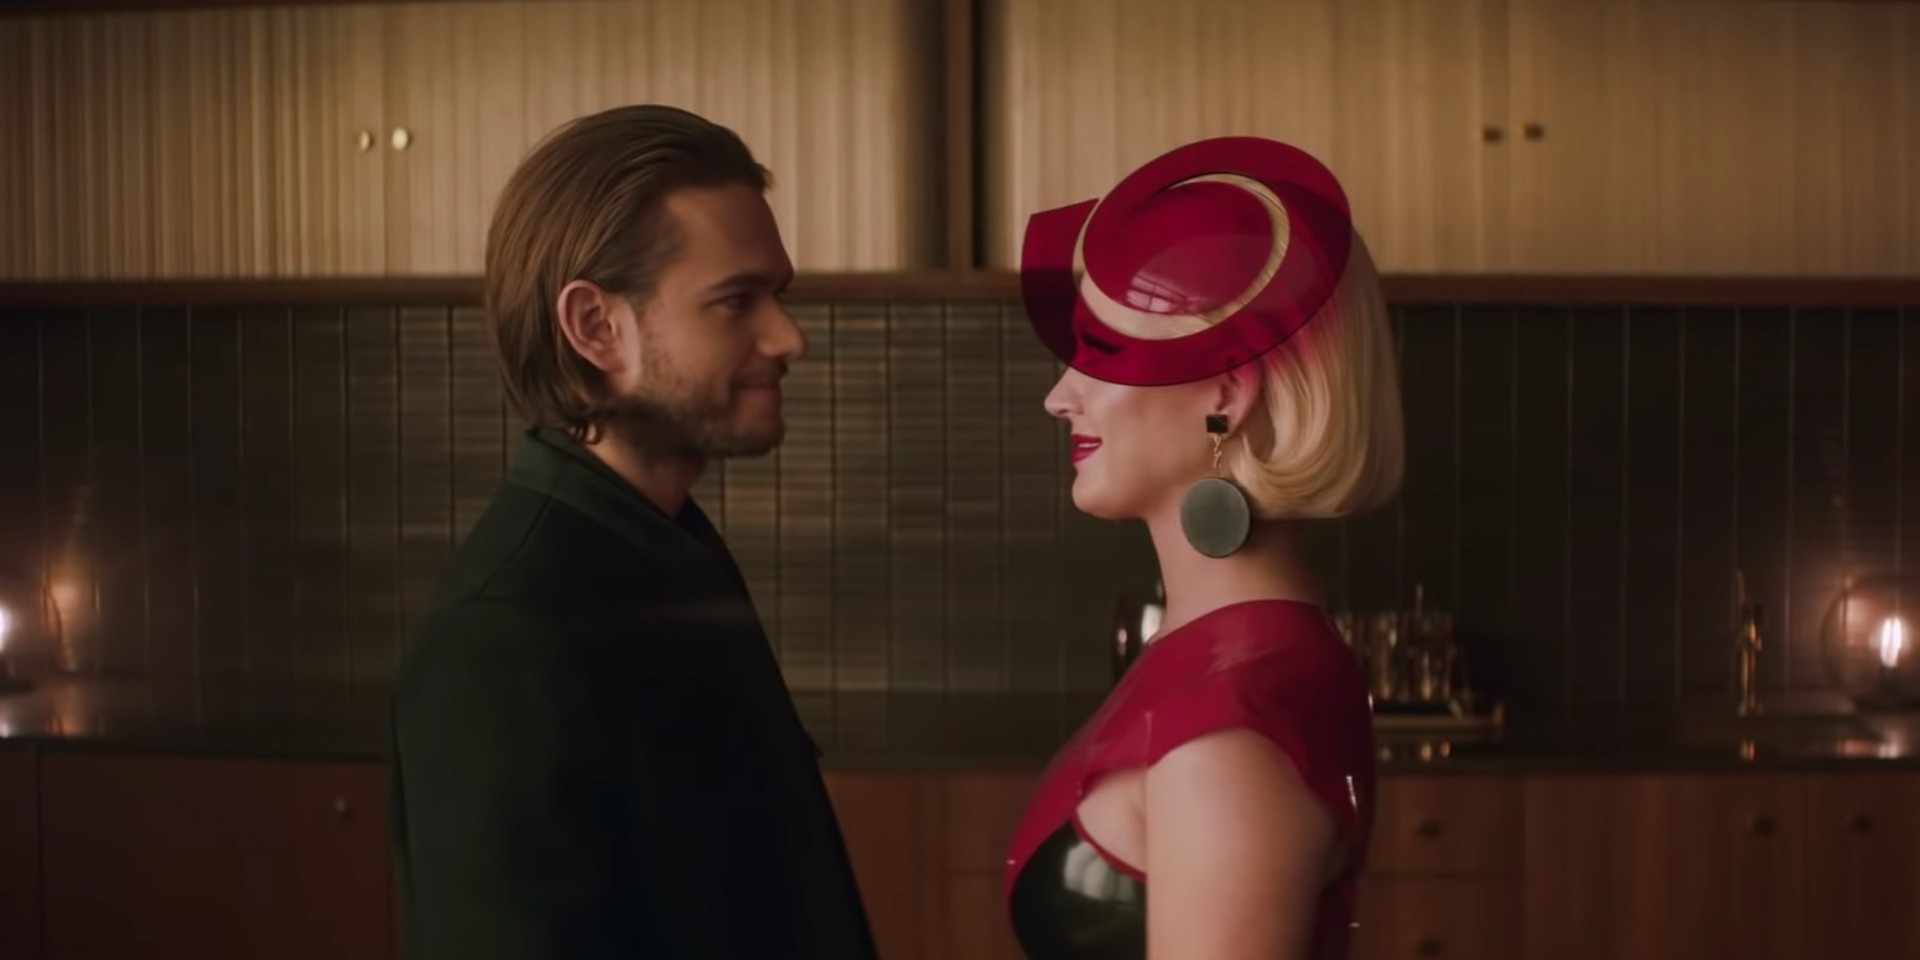 Zedd dates an obsessive AI version of Katy Perry in music video for '365' – watch